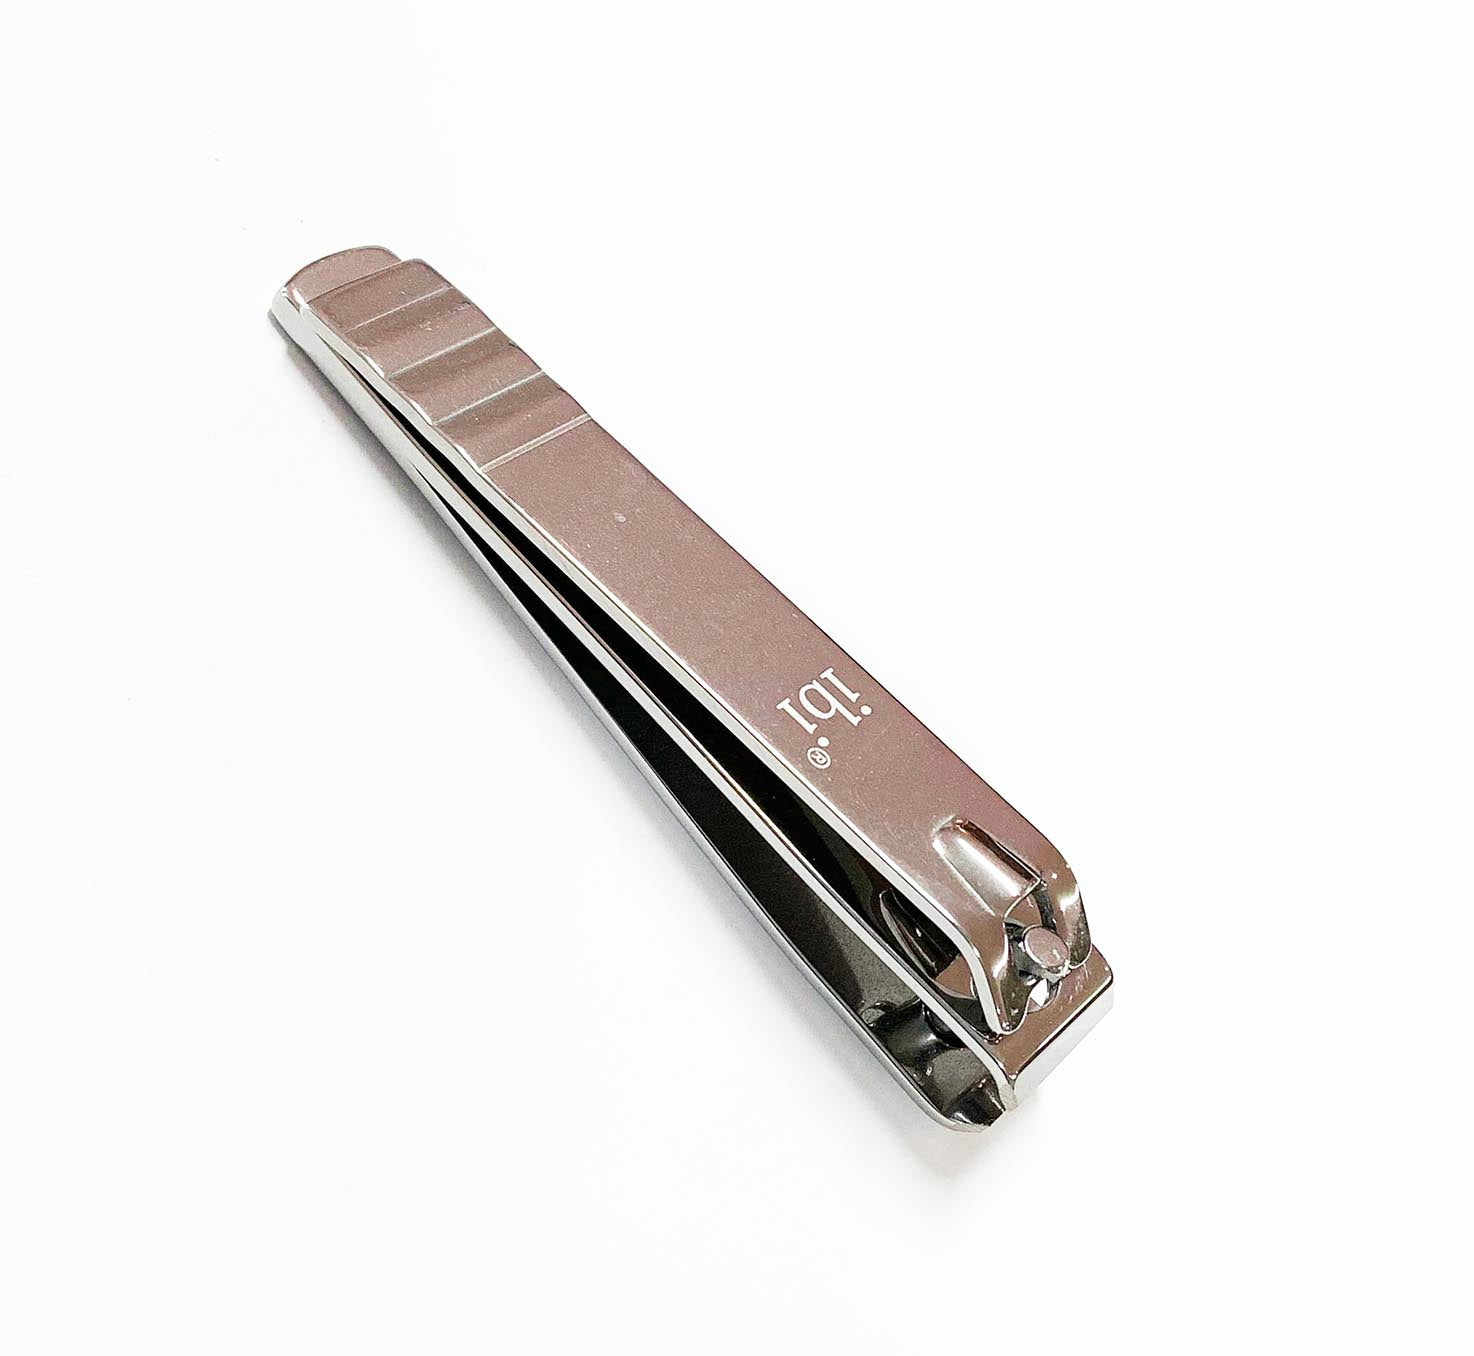 You Probably Don't Need The $50 Klhip Nail Clippers…